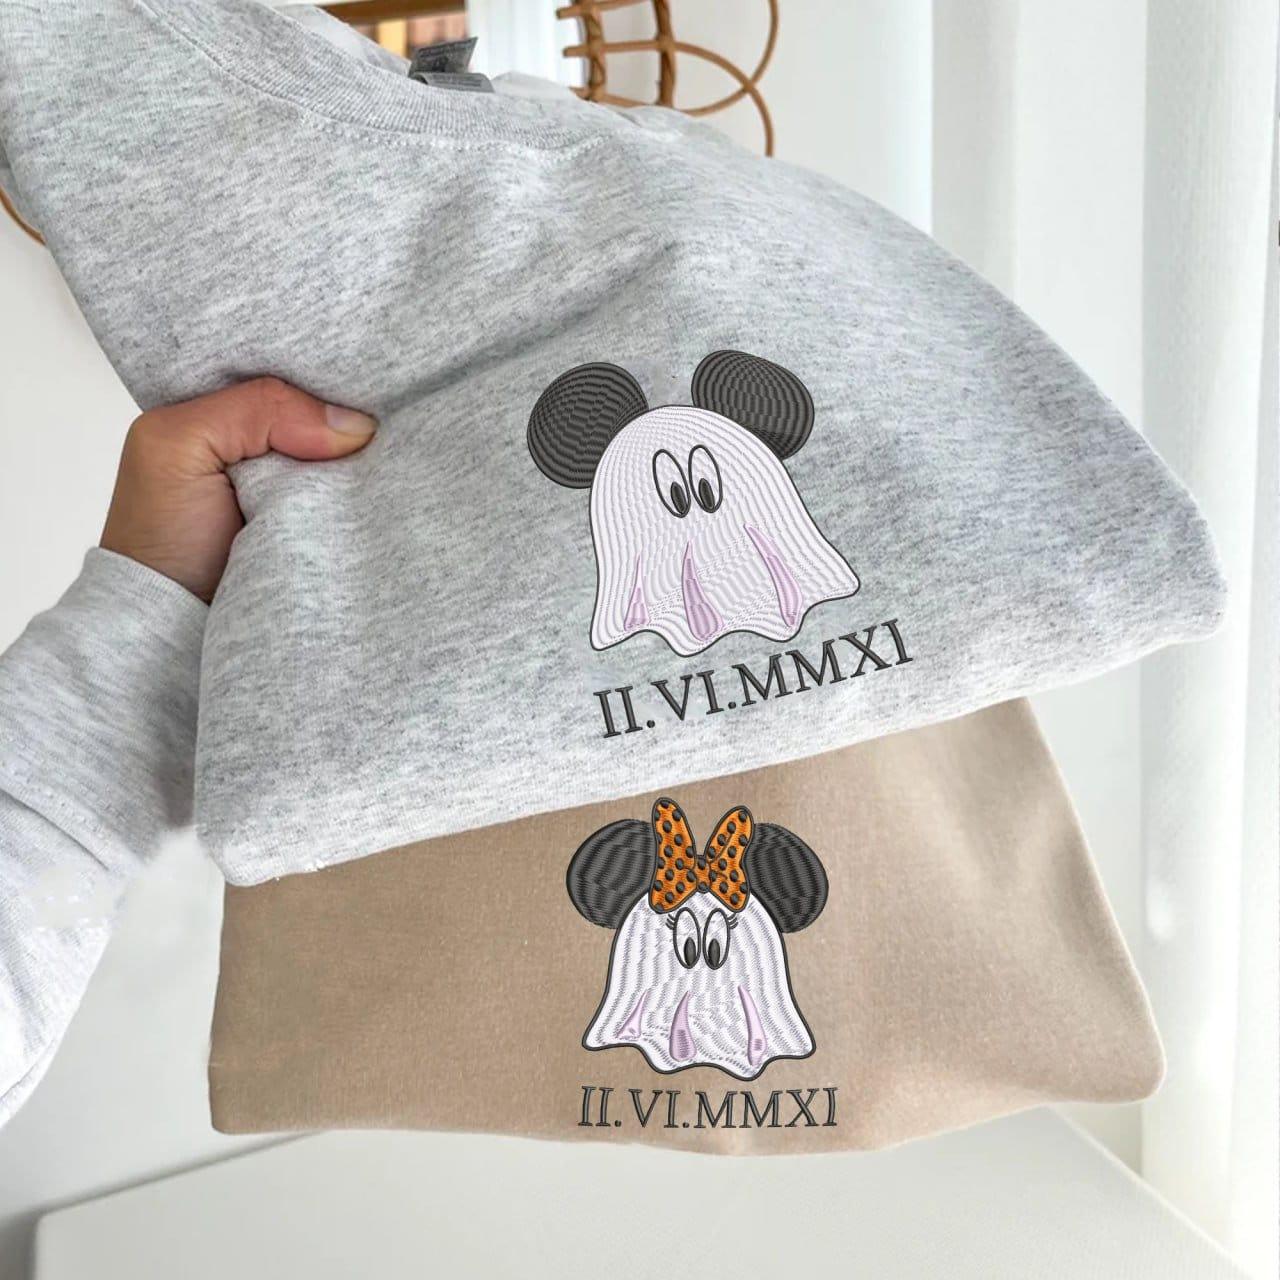 Custom Embroidered Halloweeen Sweatshirts For Couples, Custom Matching Couple Hoodies, Spooky Mouse Ghost Couples Roman Numeral Date Sweatshirt